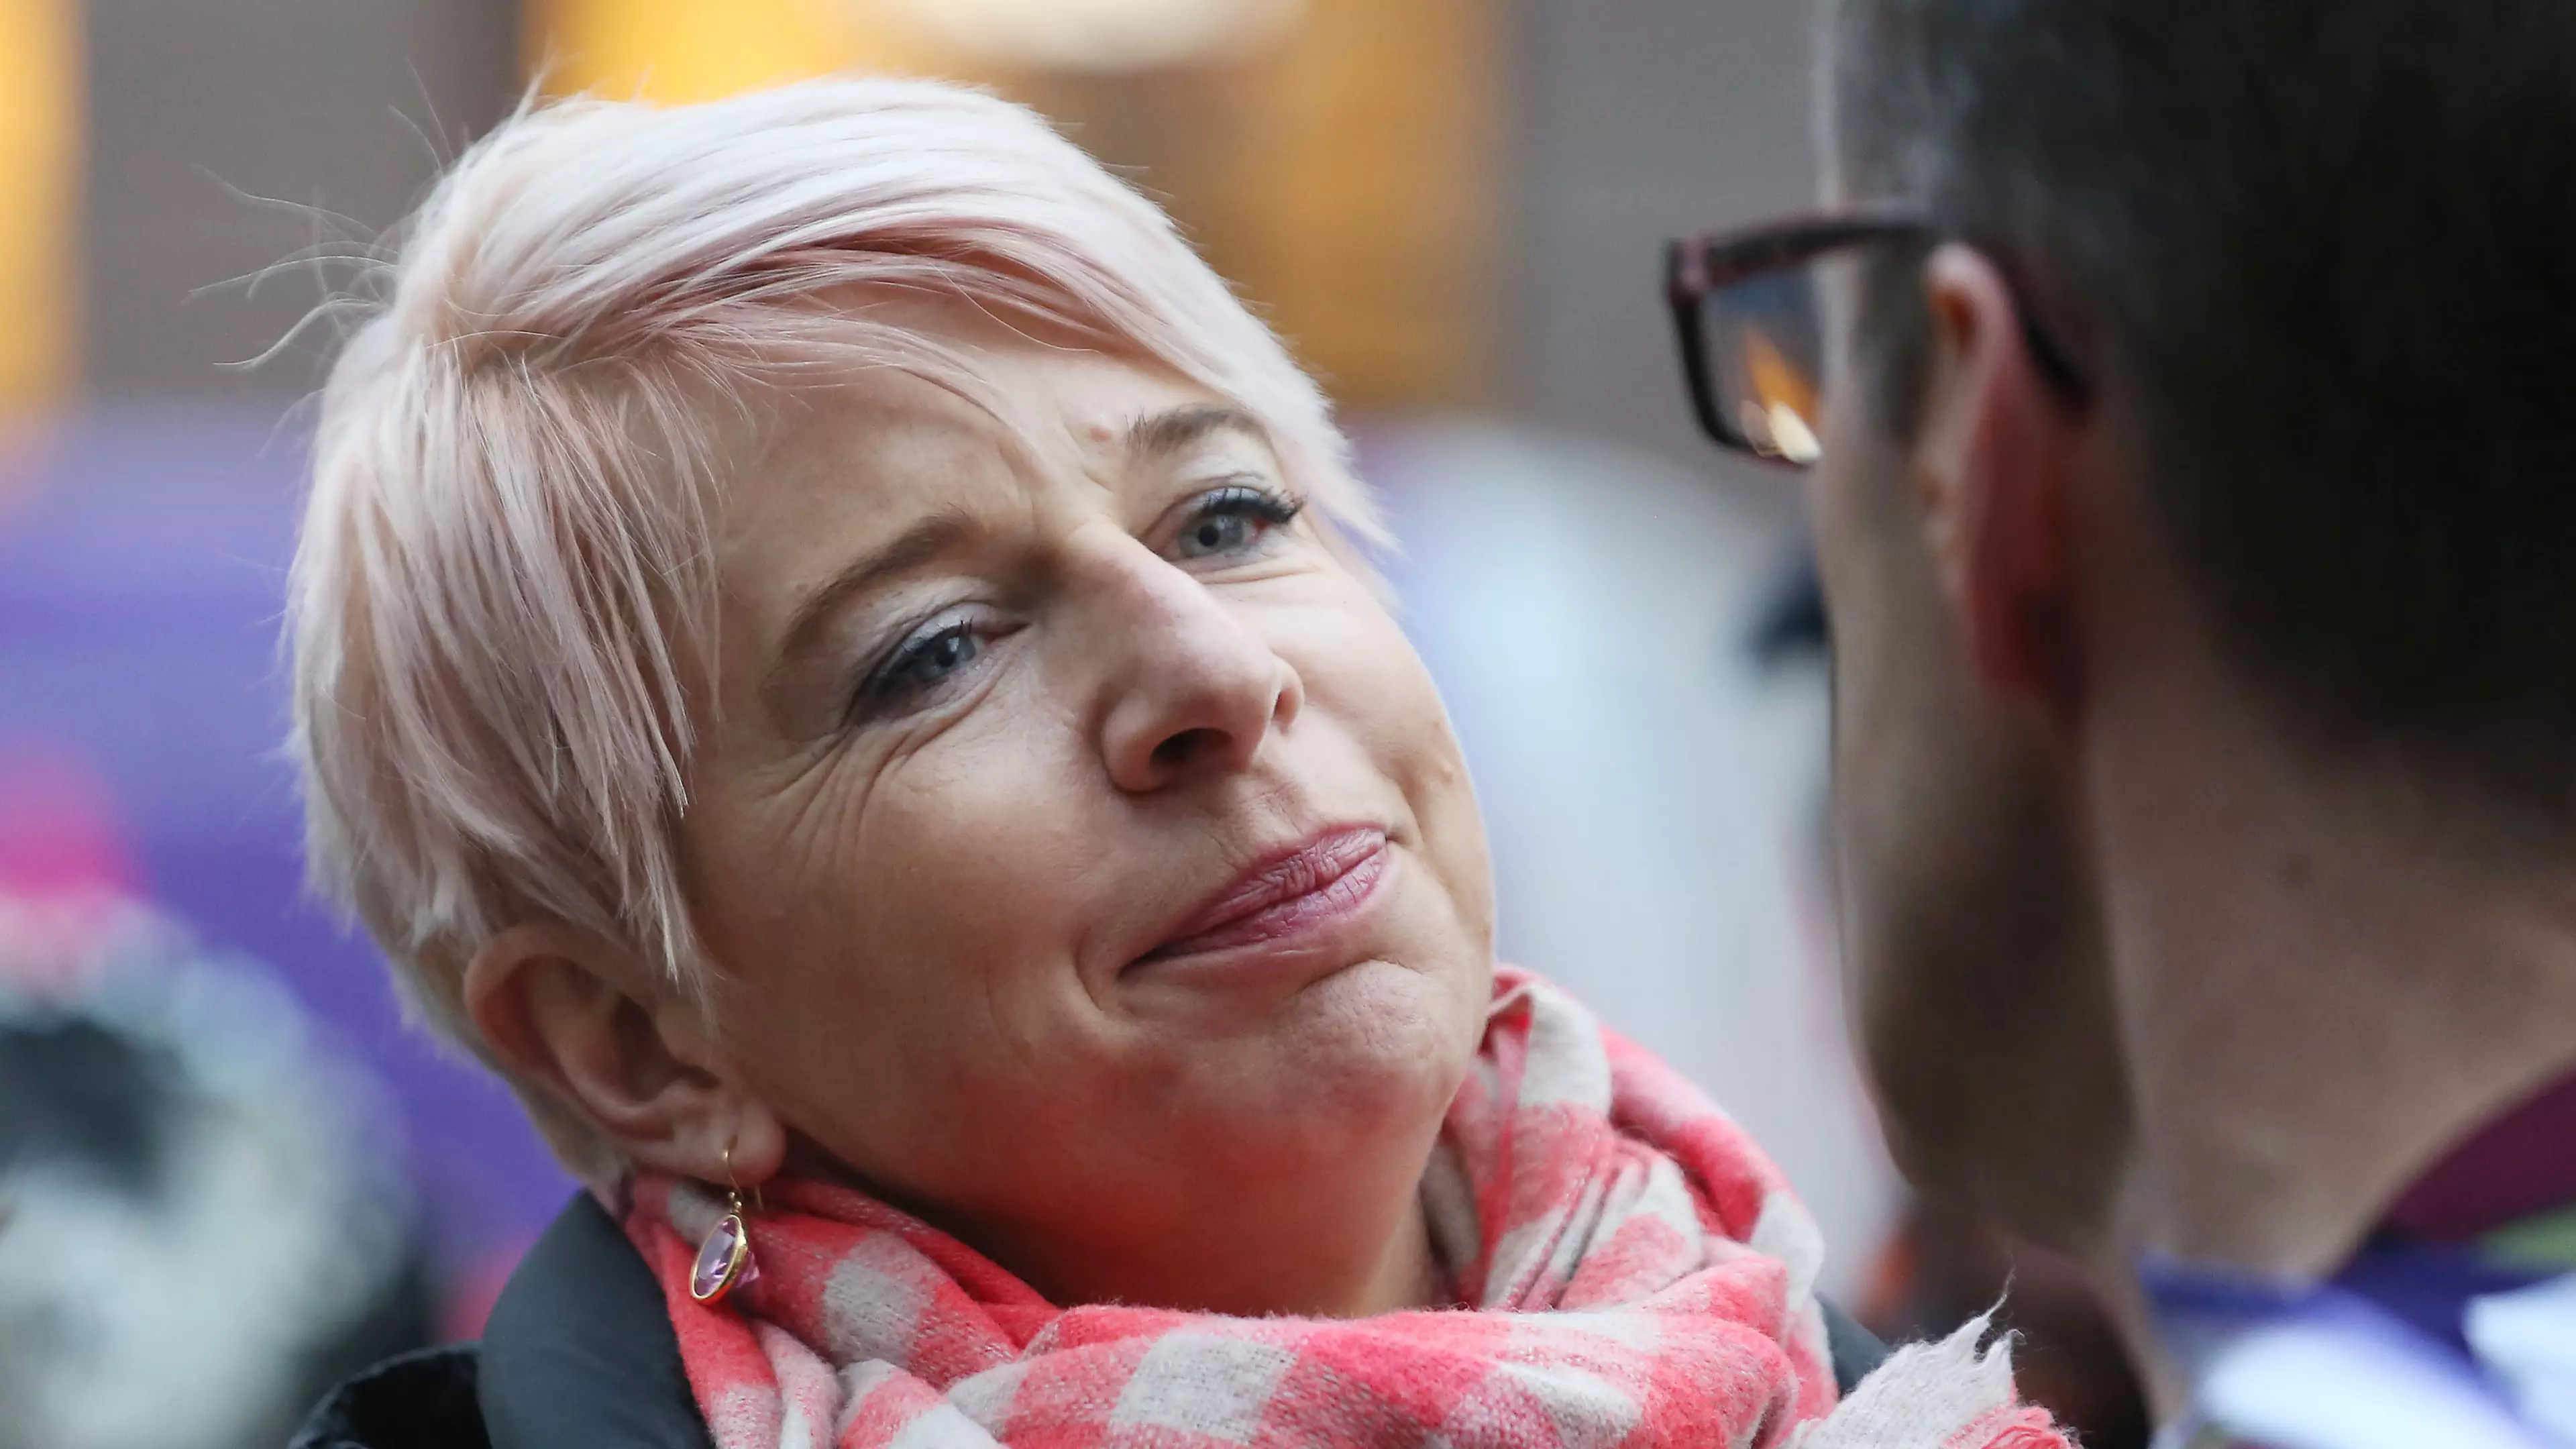 31,000 People Sign Petition Calling For Katie Hopkins To Be Deported From Australia